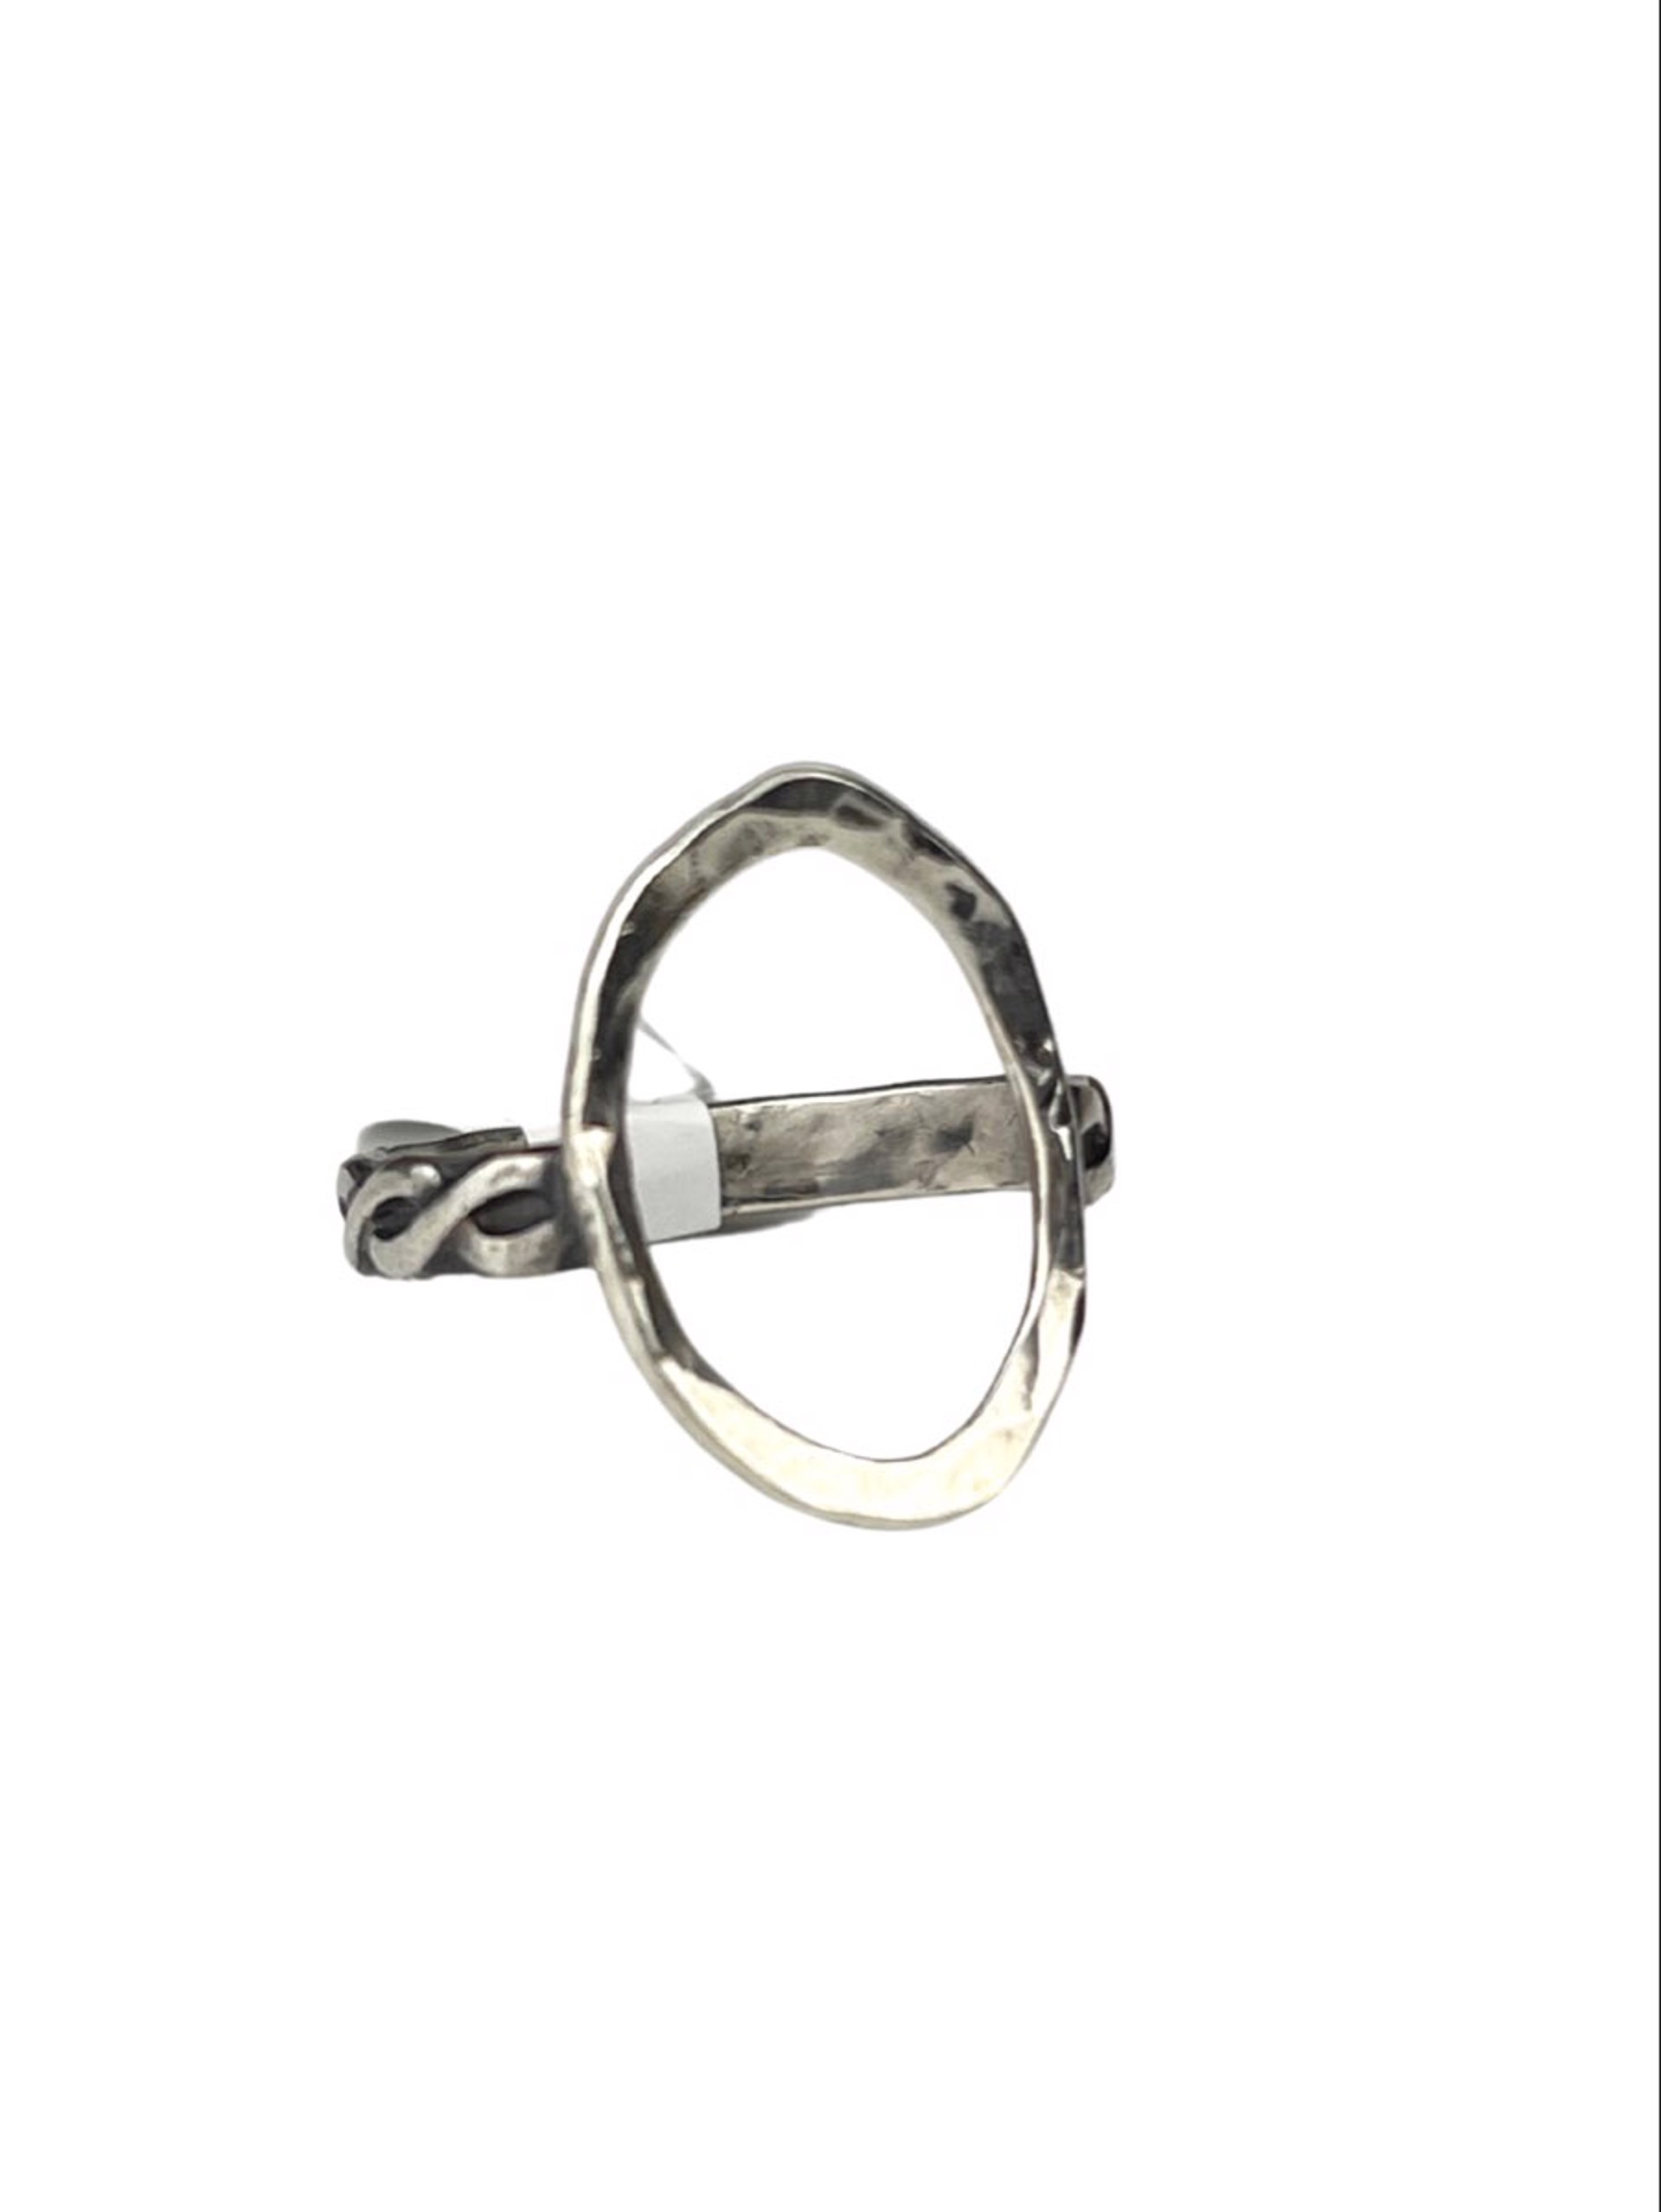 Hammered Sterling Silver Ring by Nola Smodic